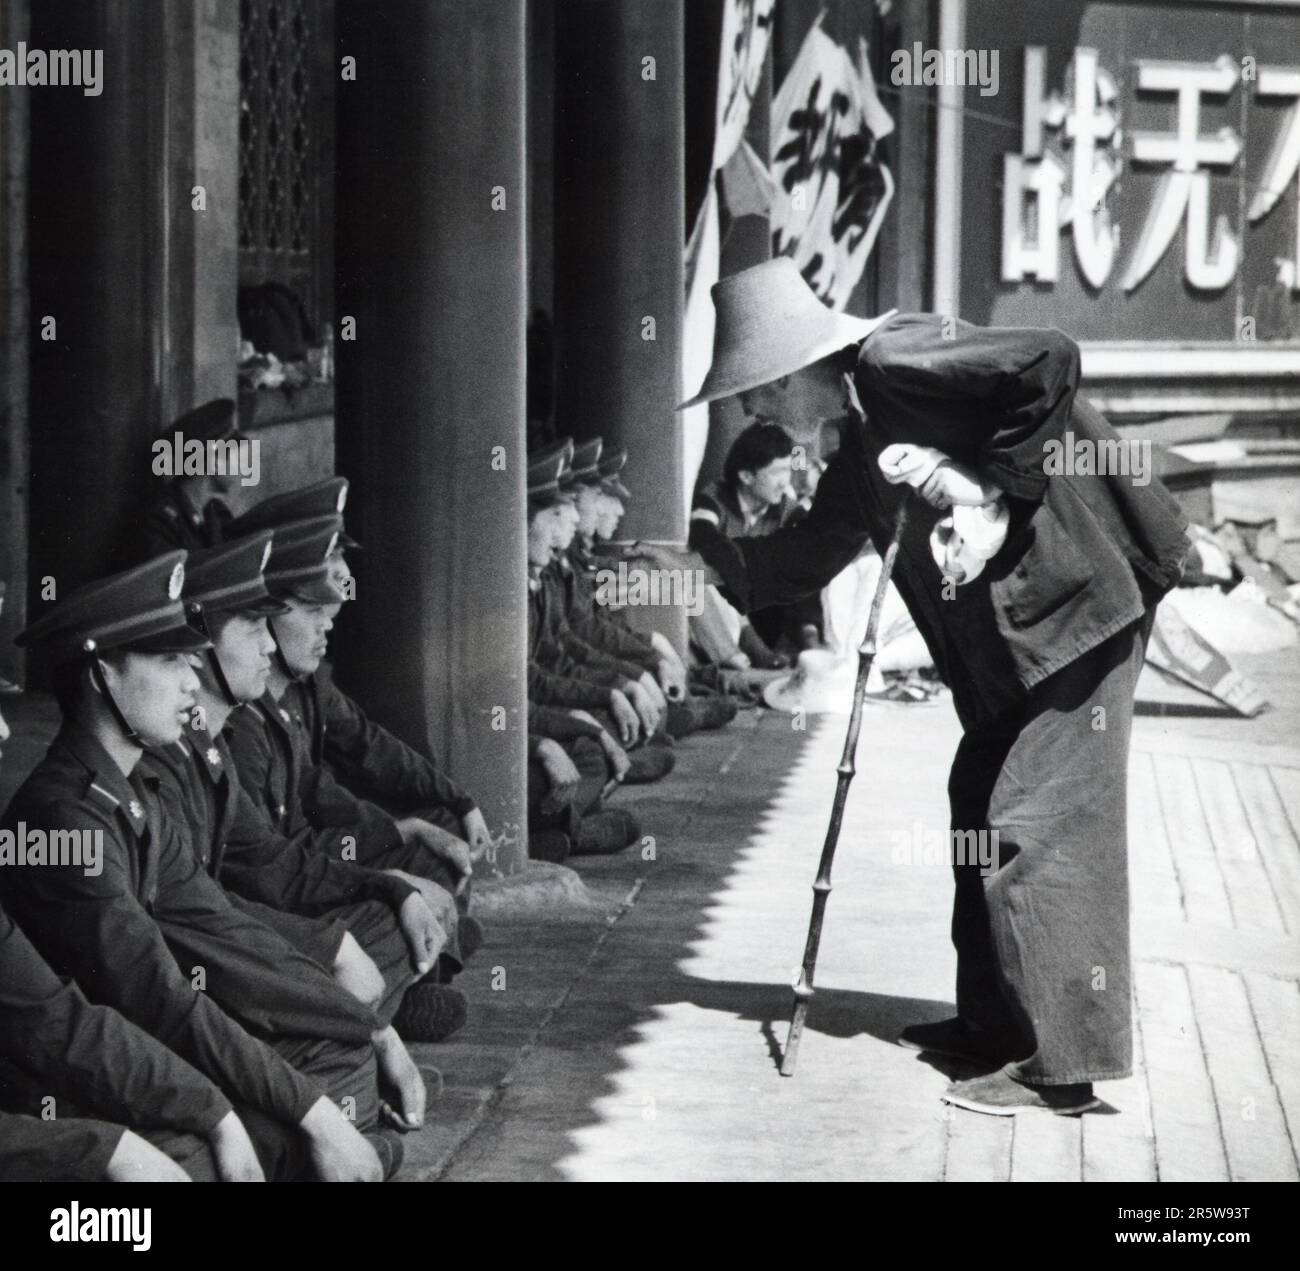 An old Chinese man lectures soldiers stationed in front of Zhongnanhai, the Chinese Communist Party headquarters in Beijing, China, on May 26, 1989. Just down the street, pro-democracy protesters occupied Tiananmen Square. Stock Photo